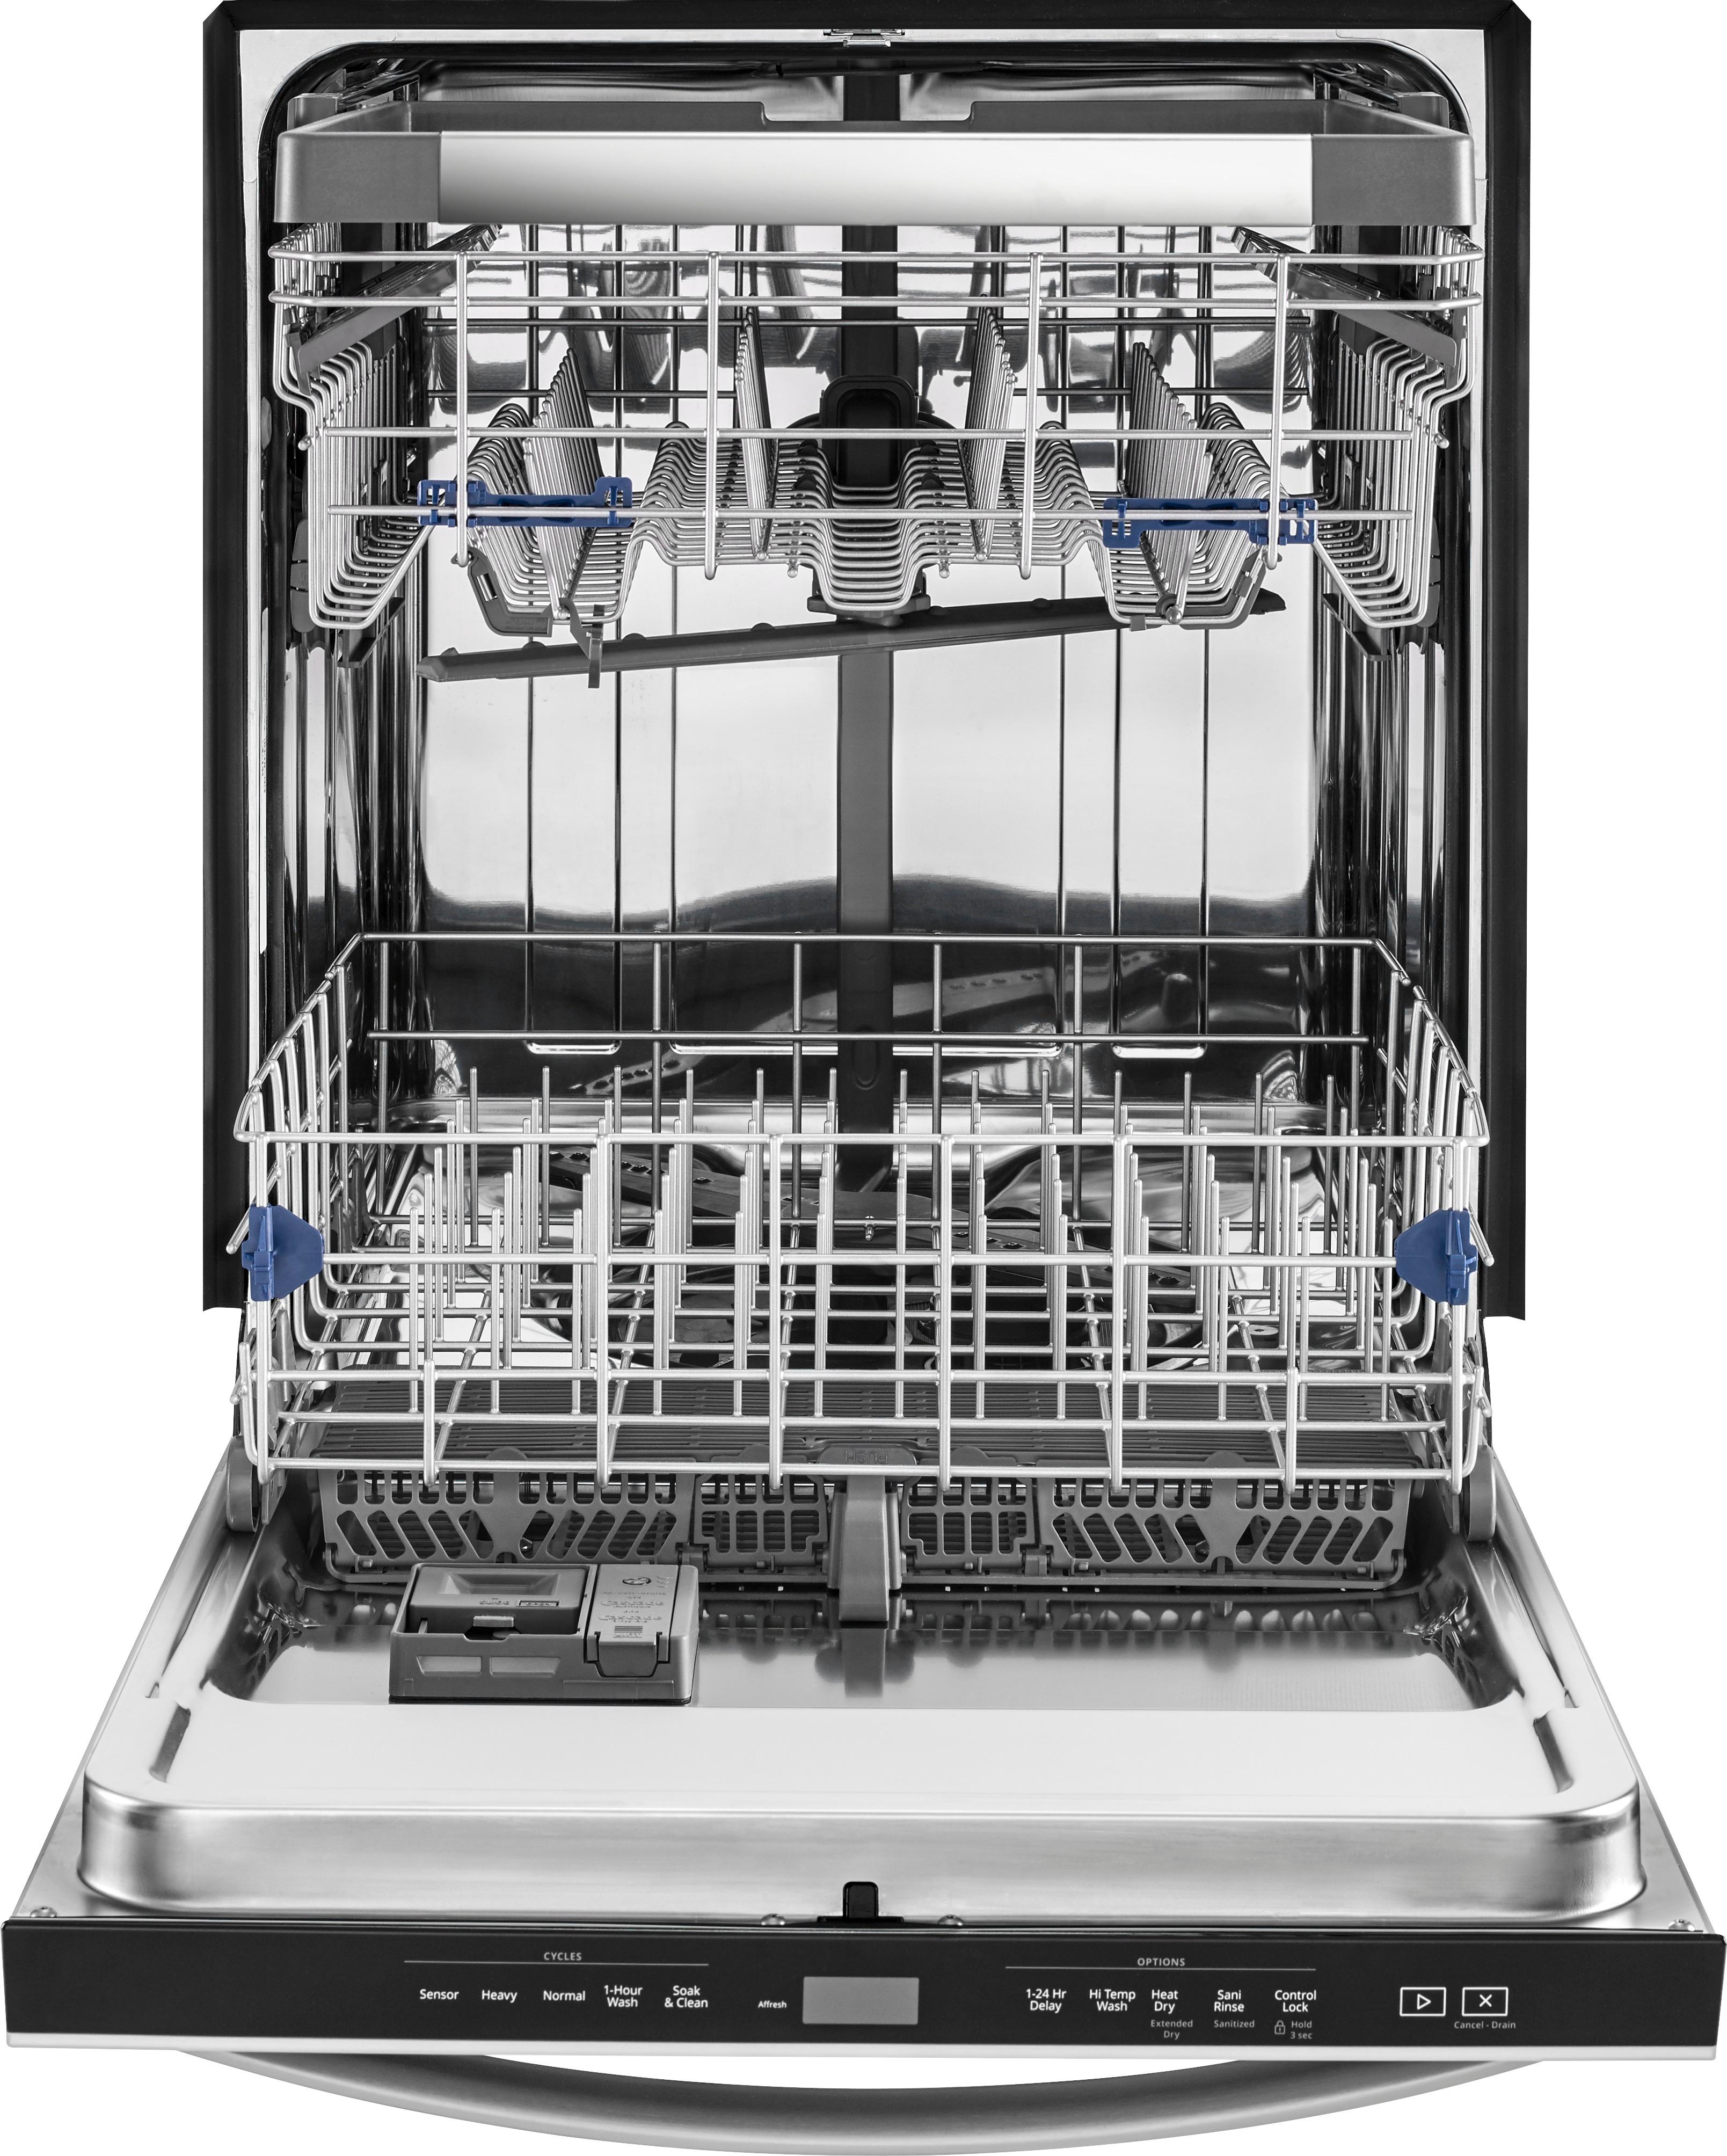 Angle View: KitchenAid - 24" Built-In Dishwasher - Stainless steel